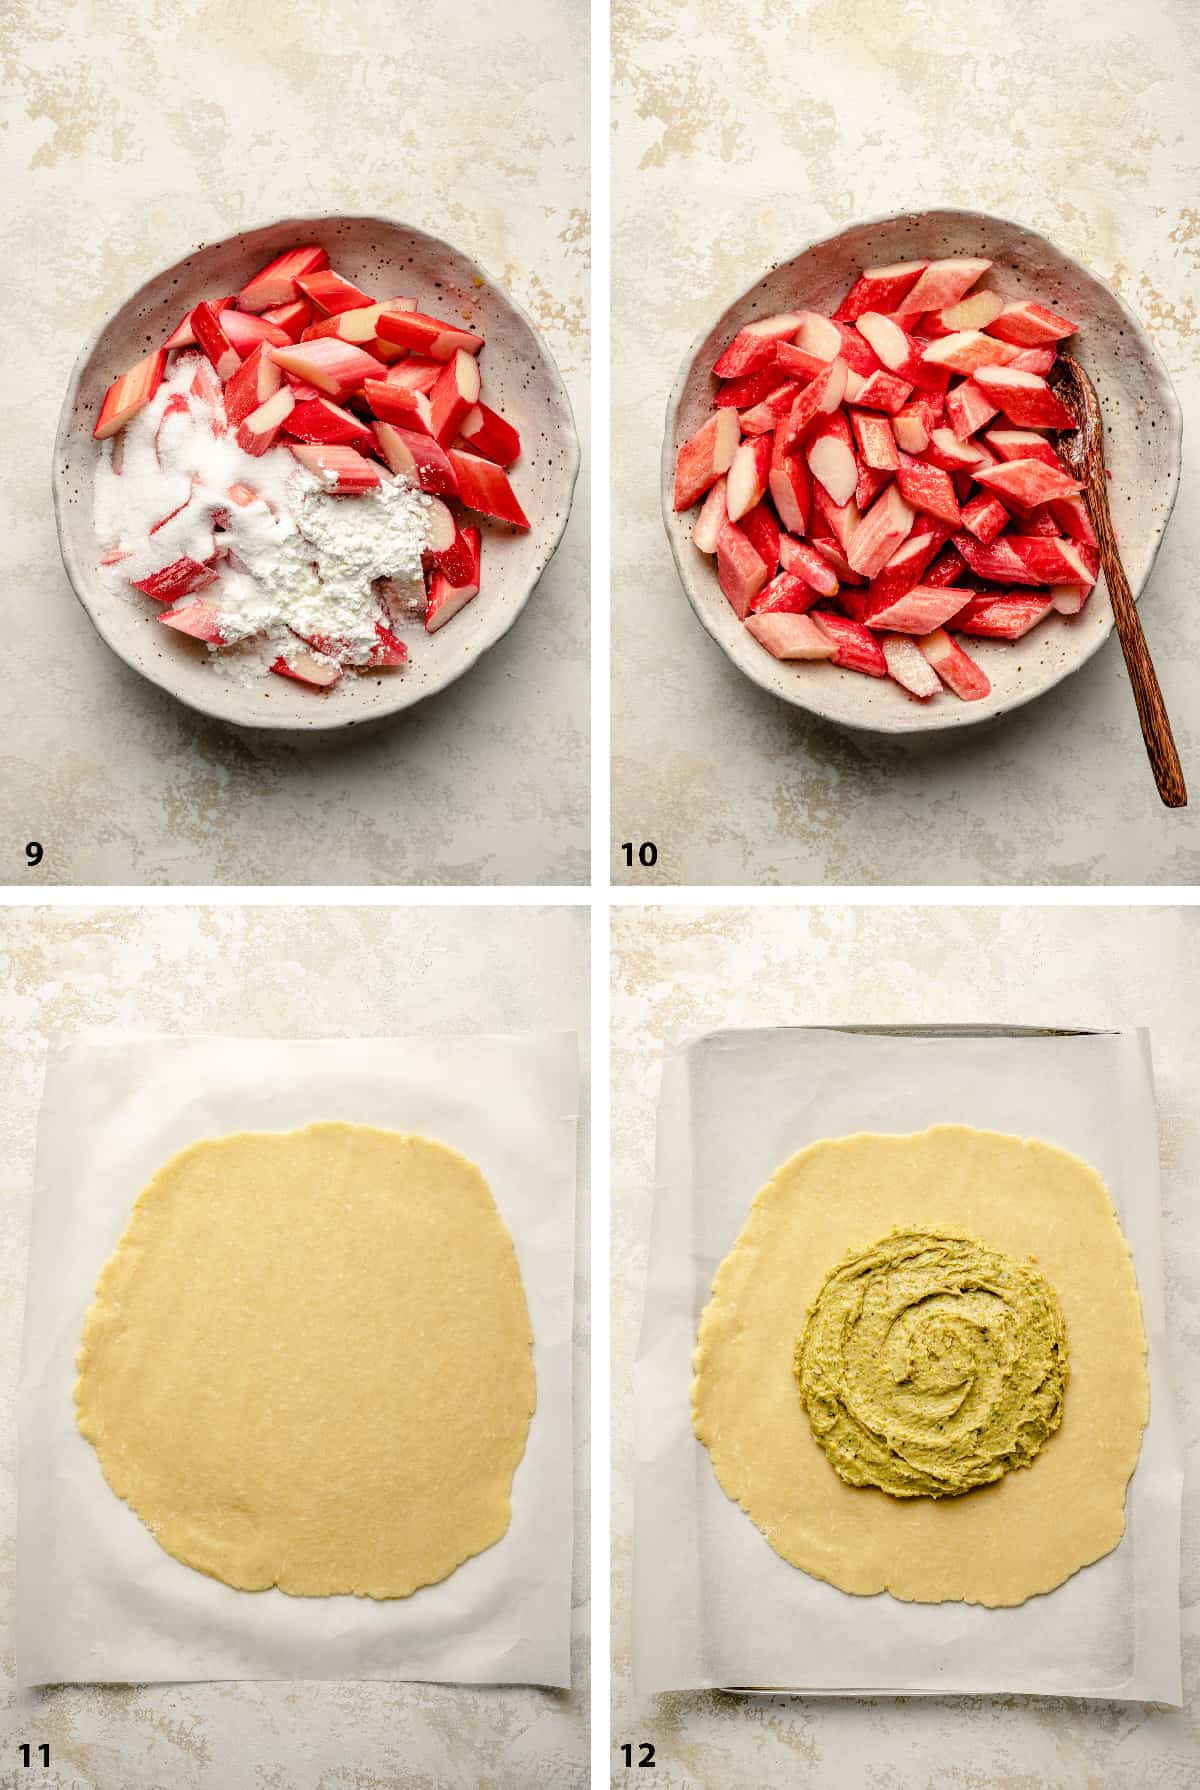 Process of making the rhubarb filling and rolling pastry then spreading with frangipane.